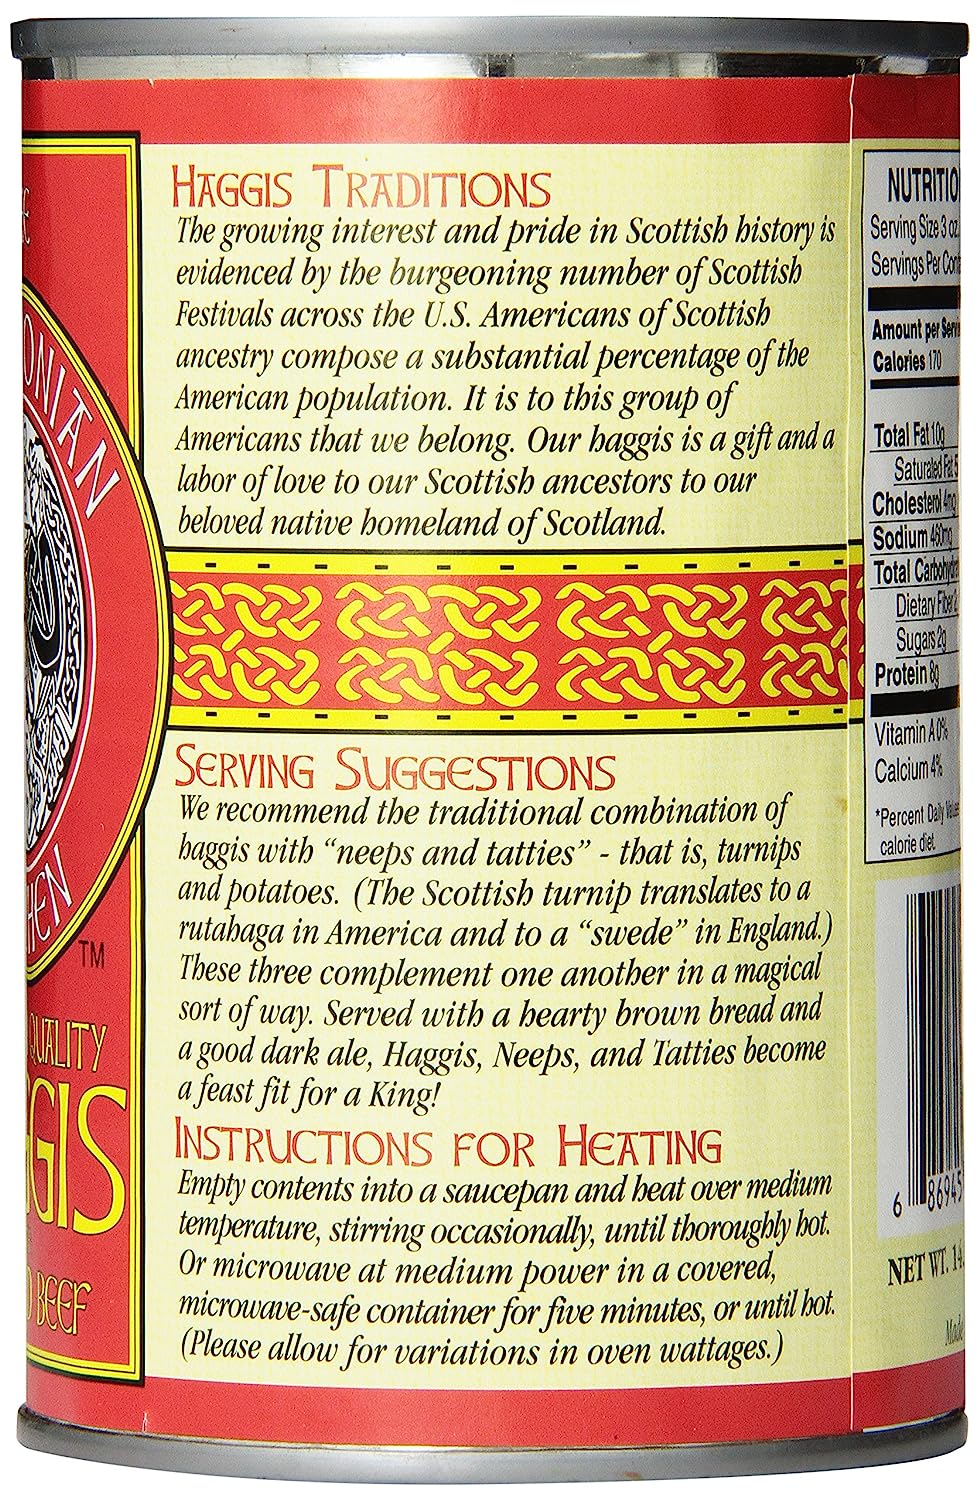  A cooking instruction label for Caledonian Kitchen Haggis with Highland Beef. The label shows that the haggis can be cooked in the oven, on the stovetop, or in the microwave.